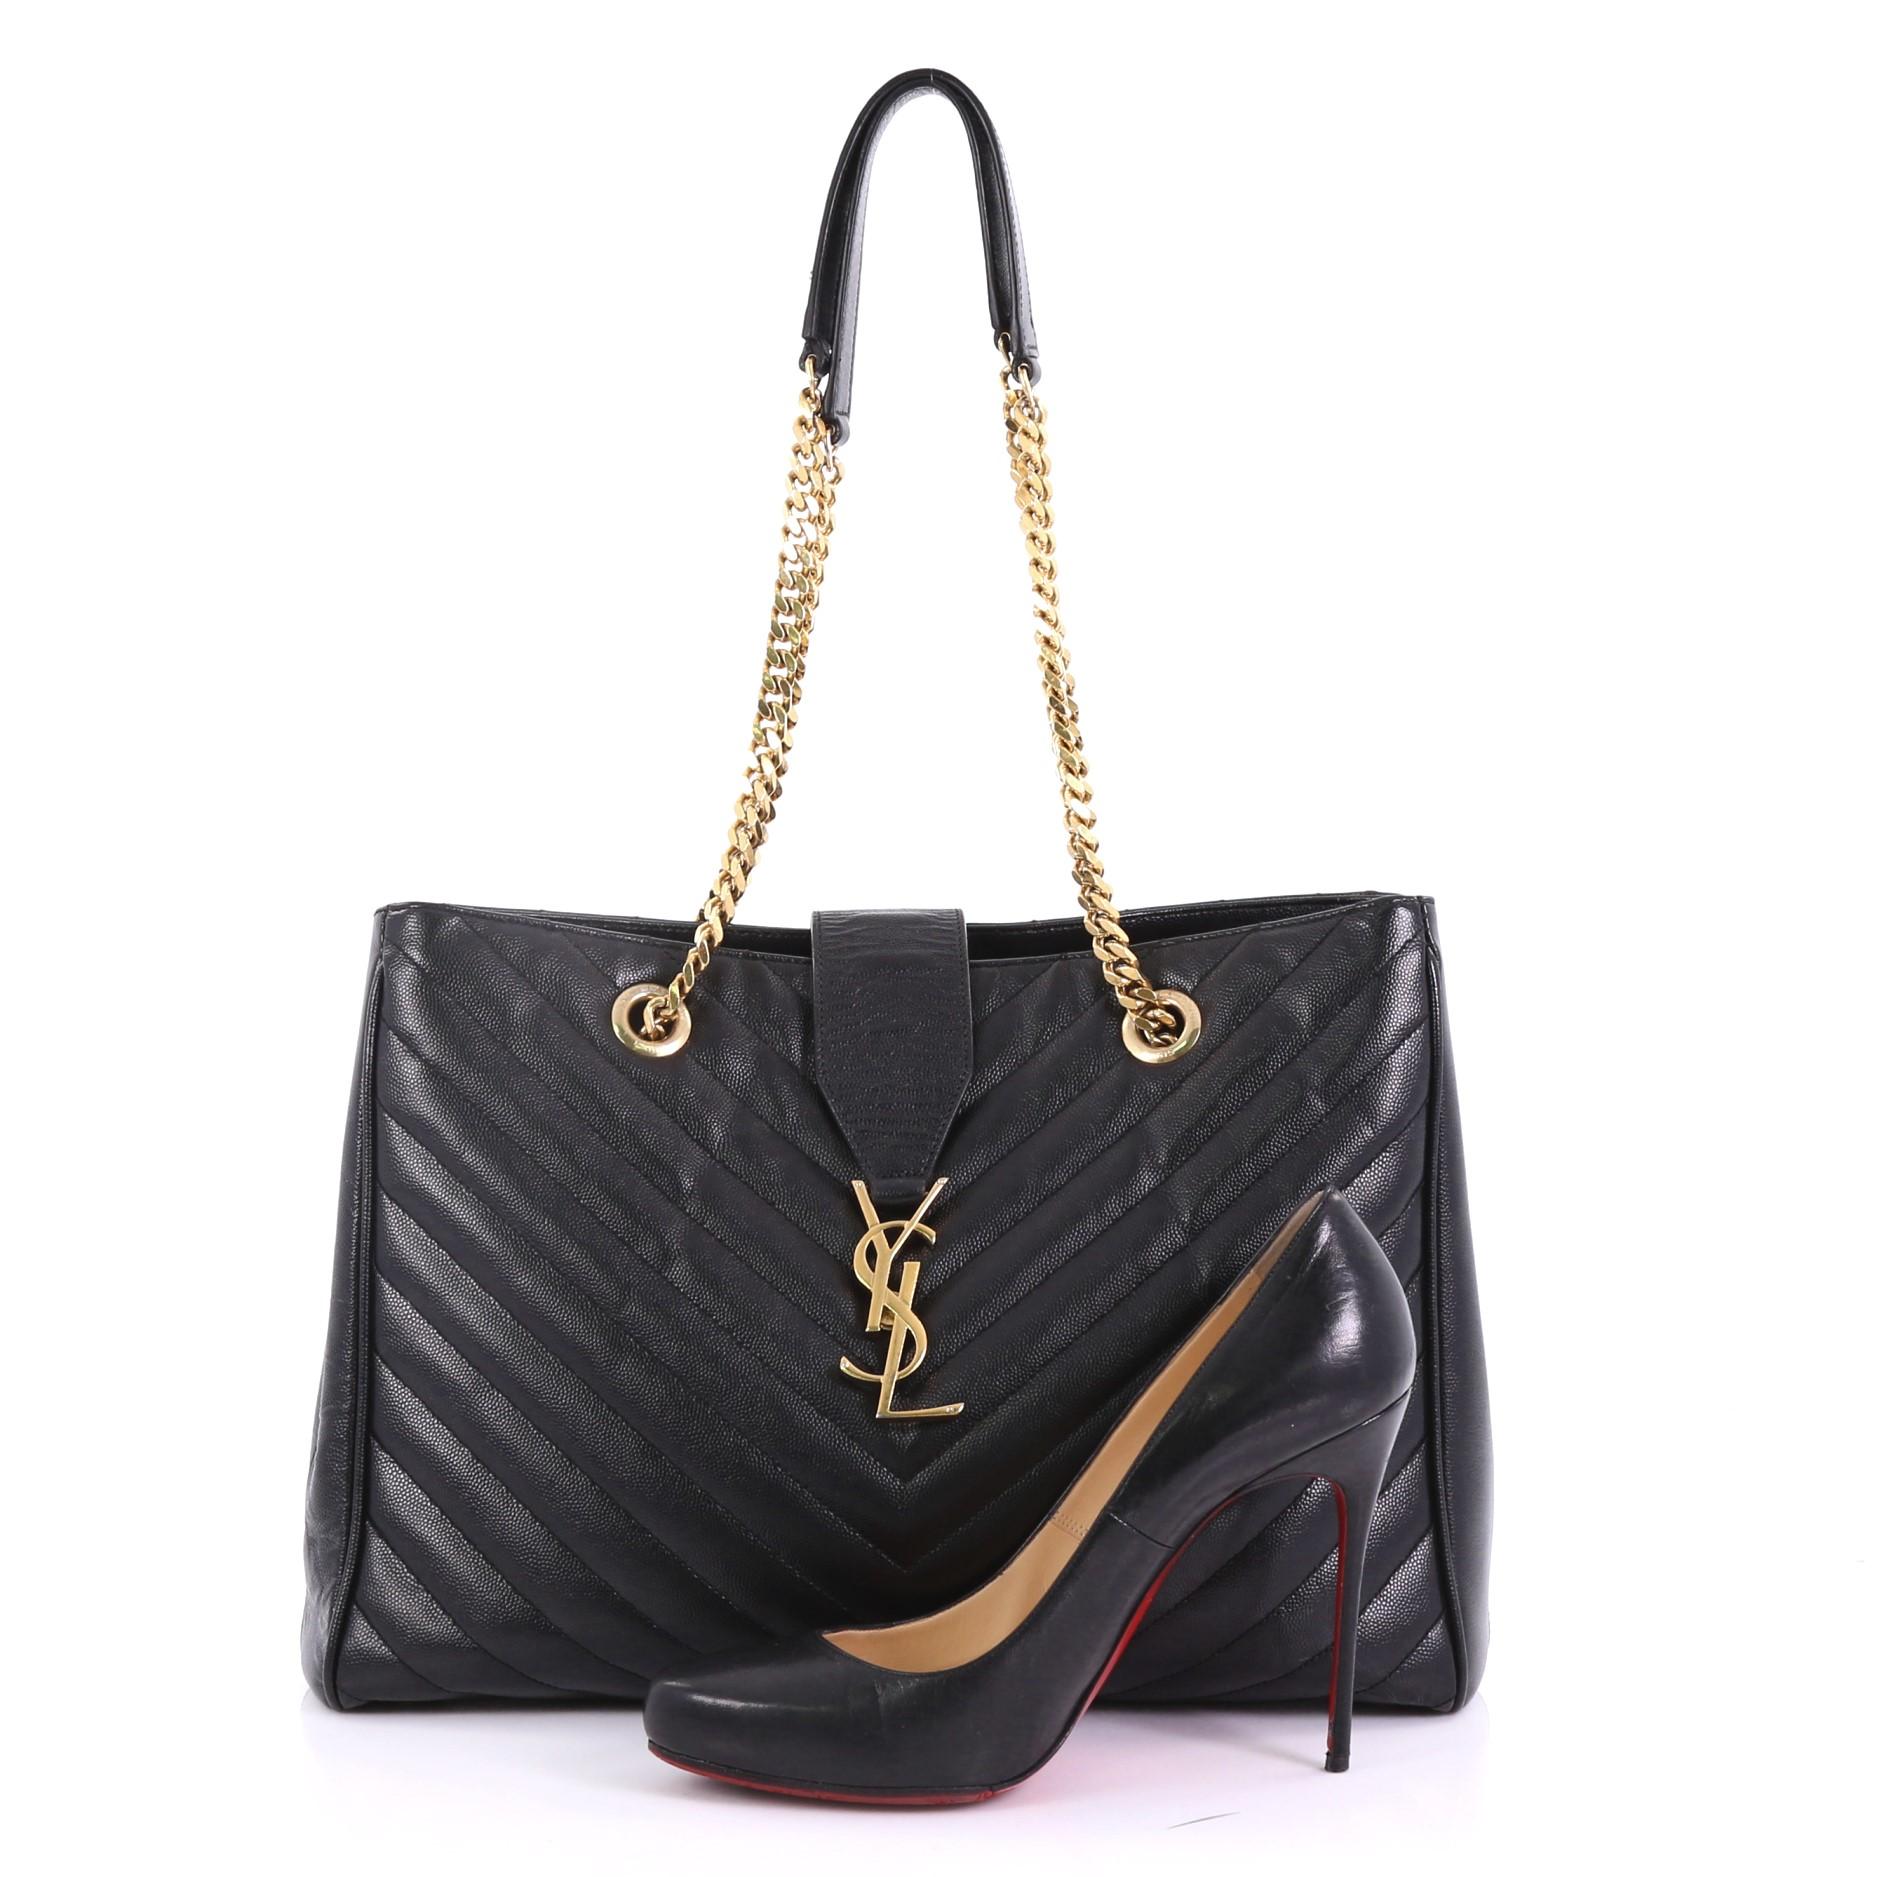 This Saint Laurent Classic Monogram Shopper Matelasse Chevron Leather Large, crafted from black matelasse chevron leather, features dual grommet chain straps with leather pads, YSL logo at the front, and gold-tone hardware. It opens to a black